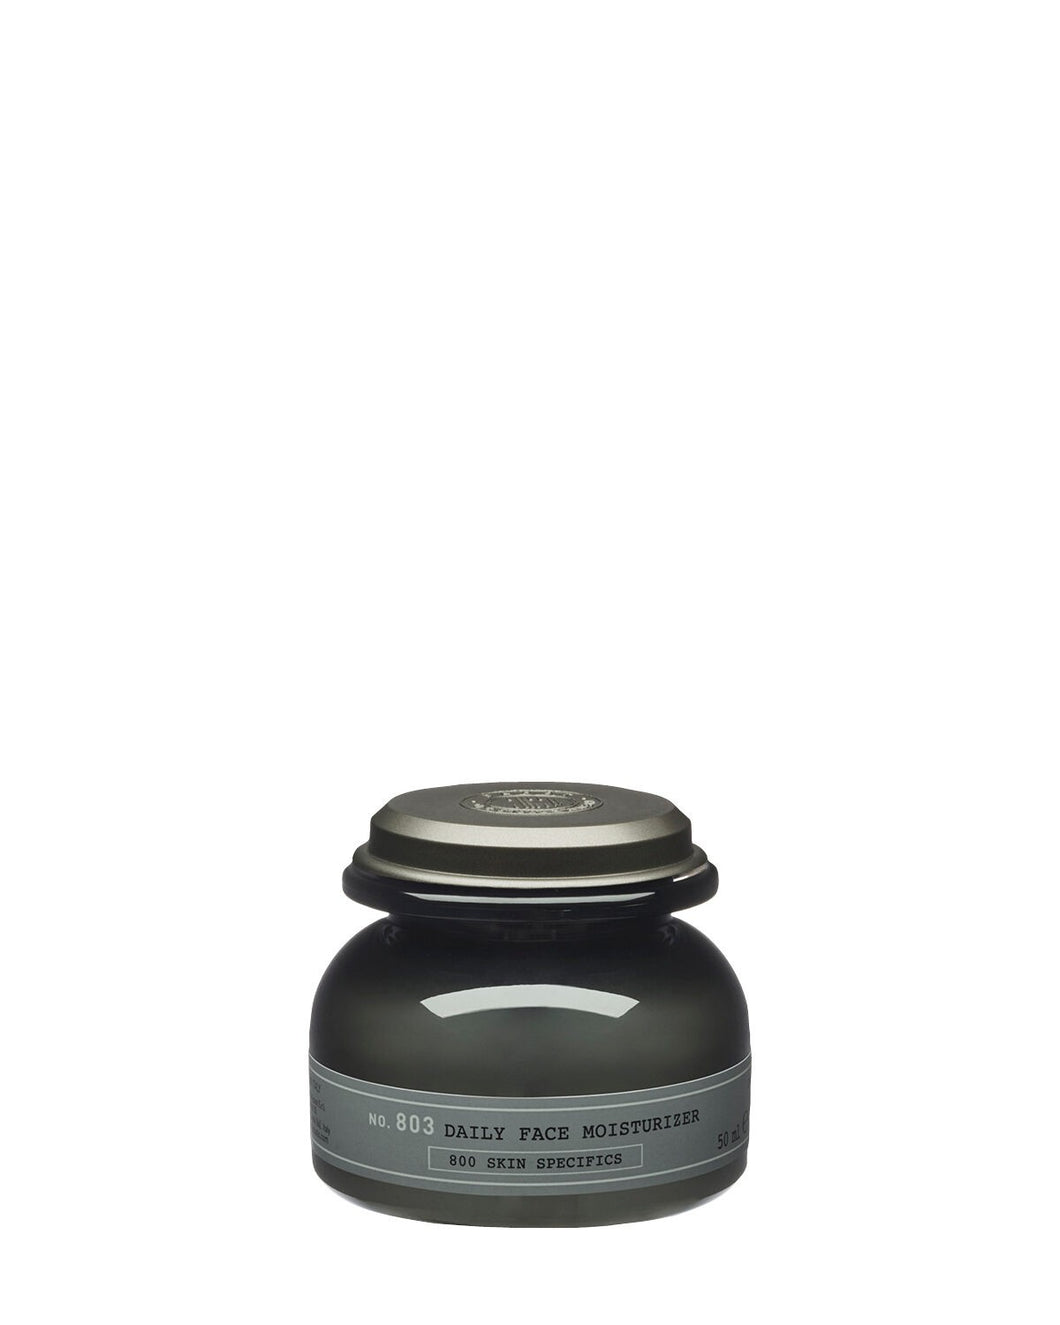 DEPOT MALE TOOL NO. 803 DAILY FACE MOISTURIZER